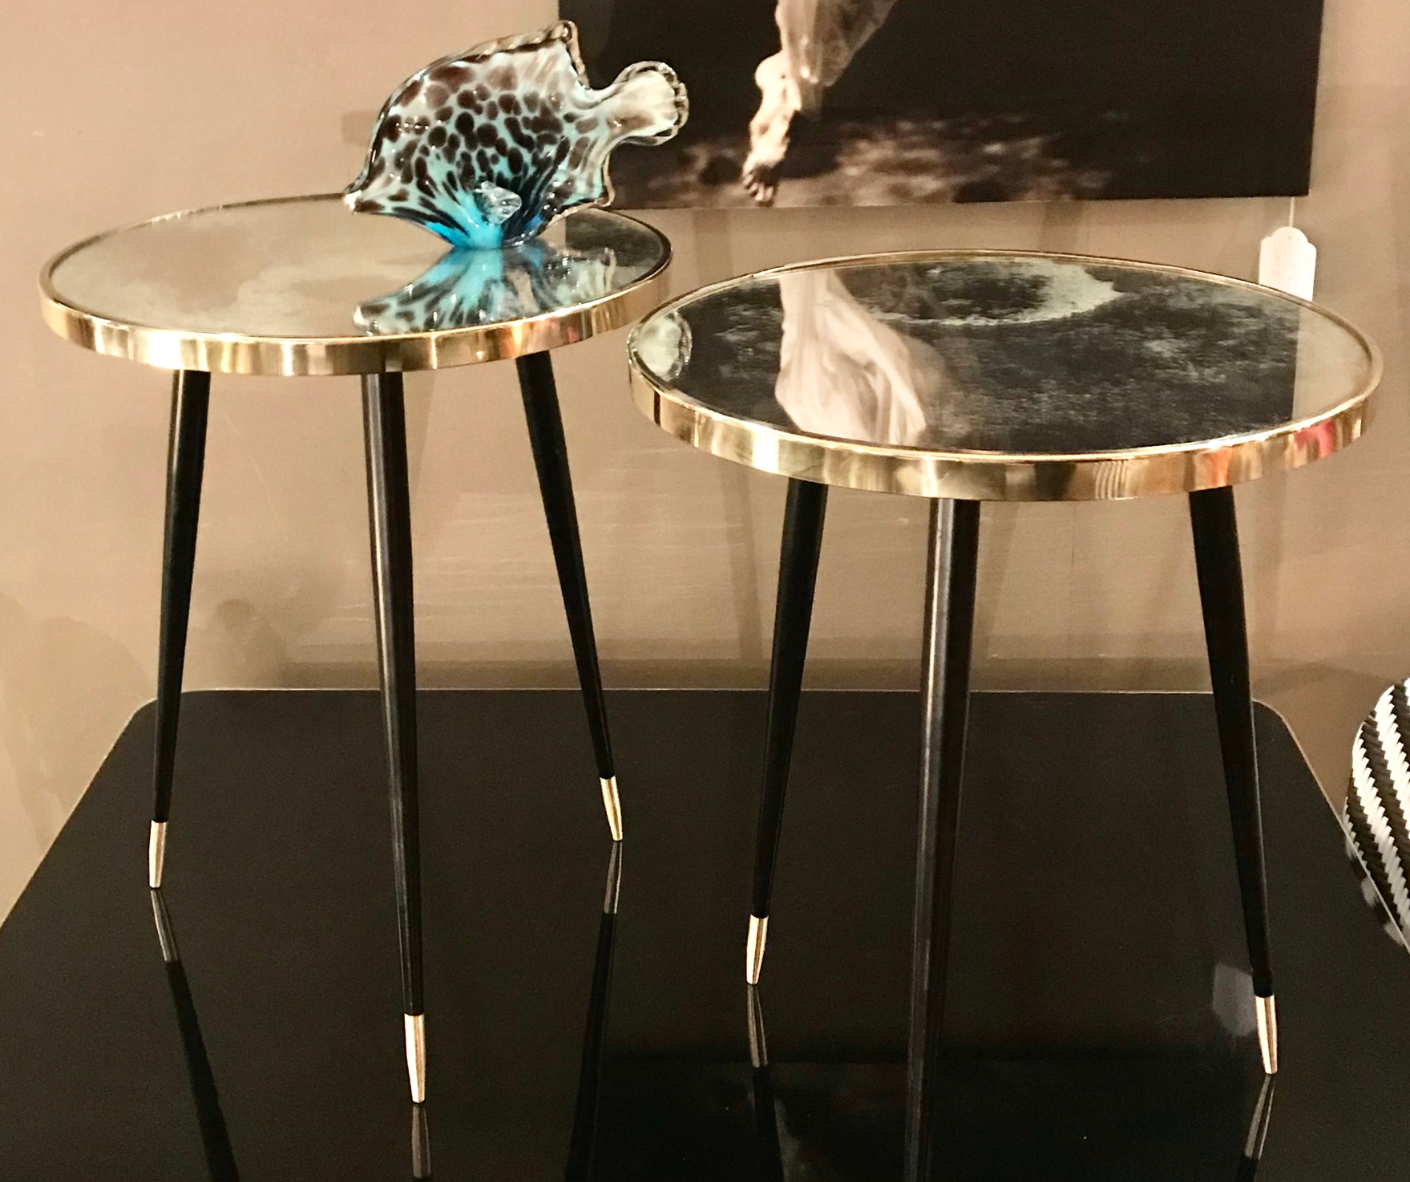 Twist Round Coffee/Side Table with Mirror or High-Gloss Laminate, Customizable